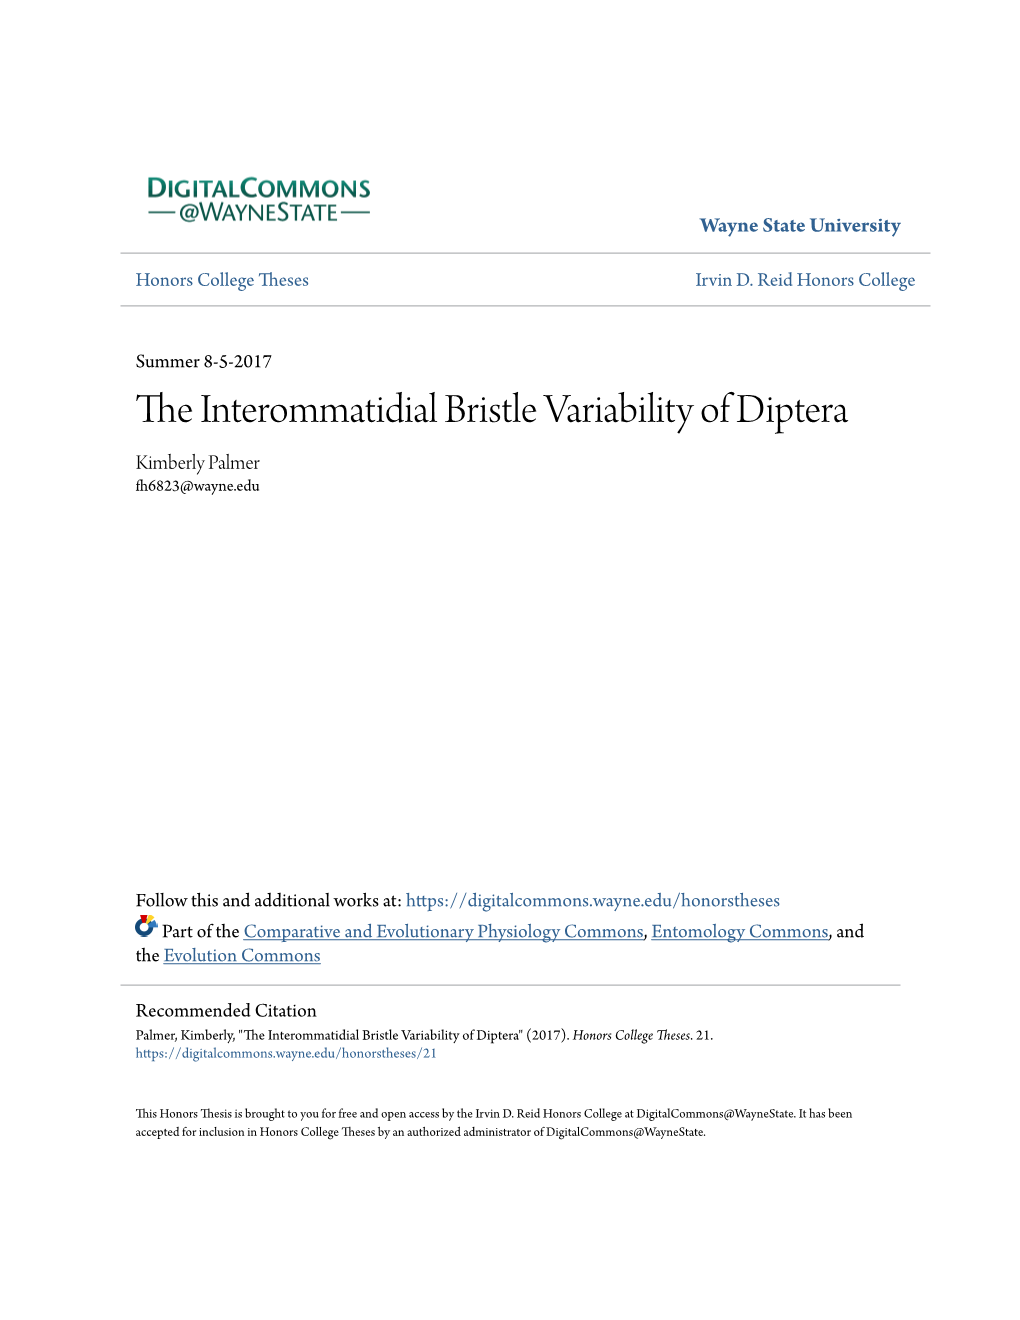 The Interommatidial Bristle Variability of Diptera ​